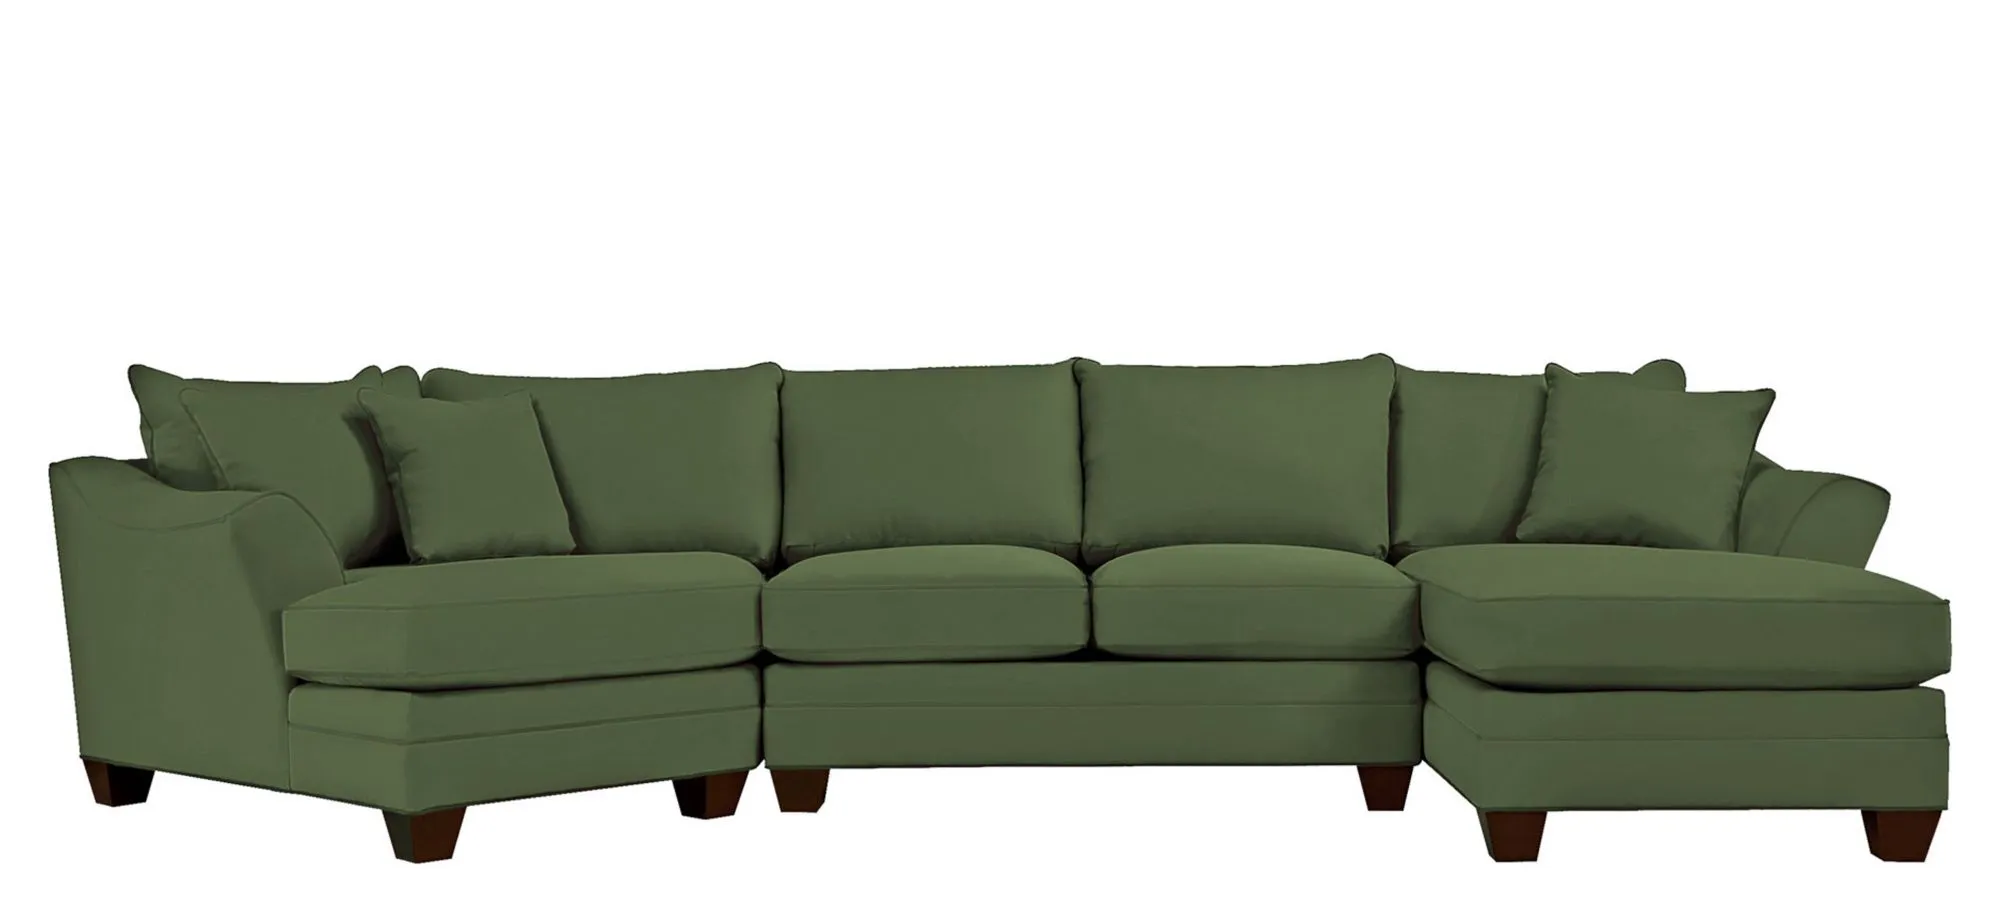 Foresthill 3-pc. Right Hand Facing Sectional Sofa in Suede So Soft Pine by H.M. Richards